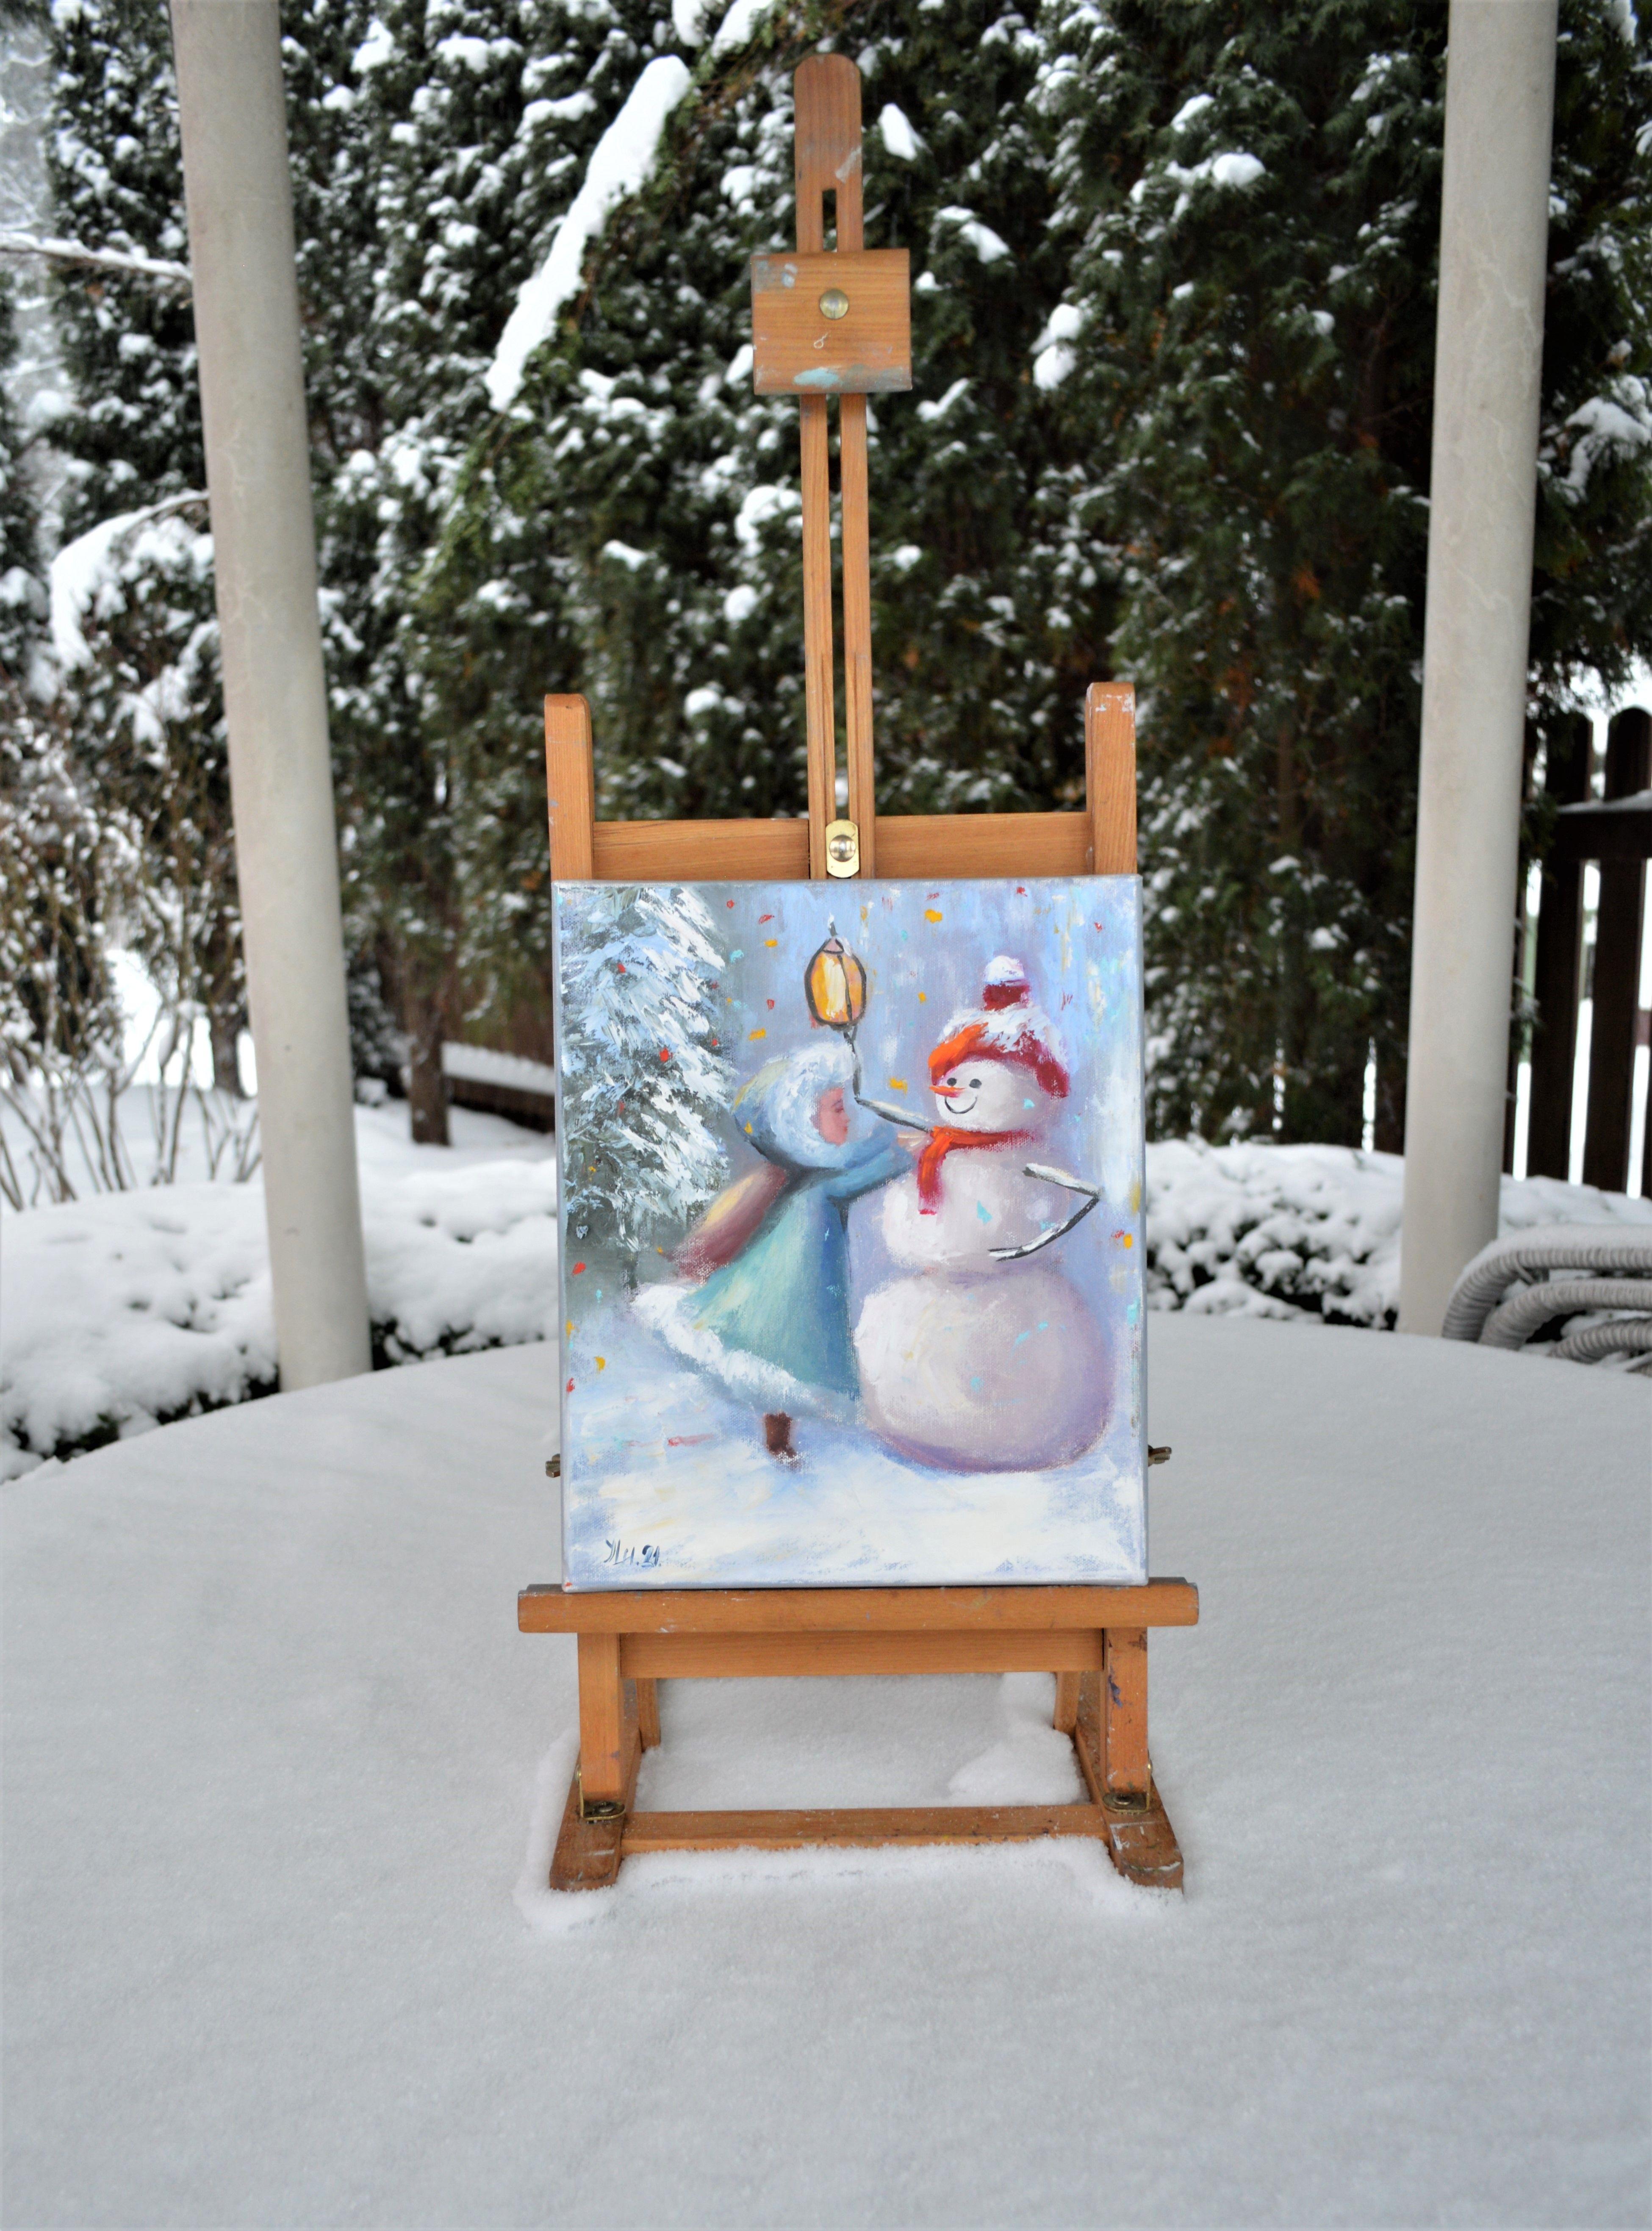 Dress up the snowman! Gift Art 30X25 - Painting by Elena Lukina